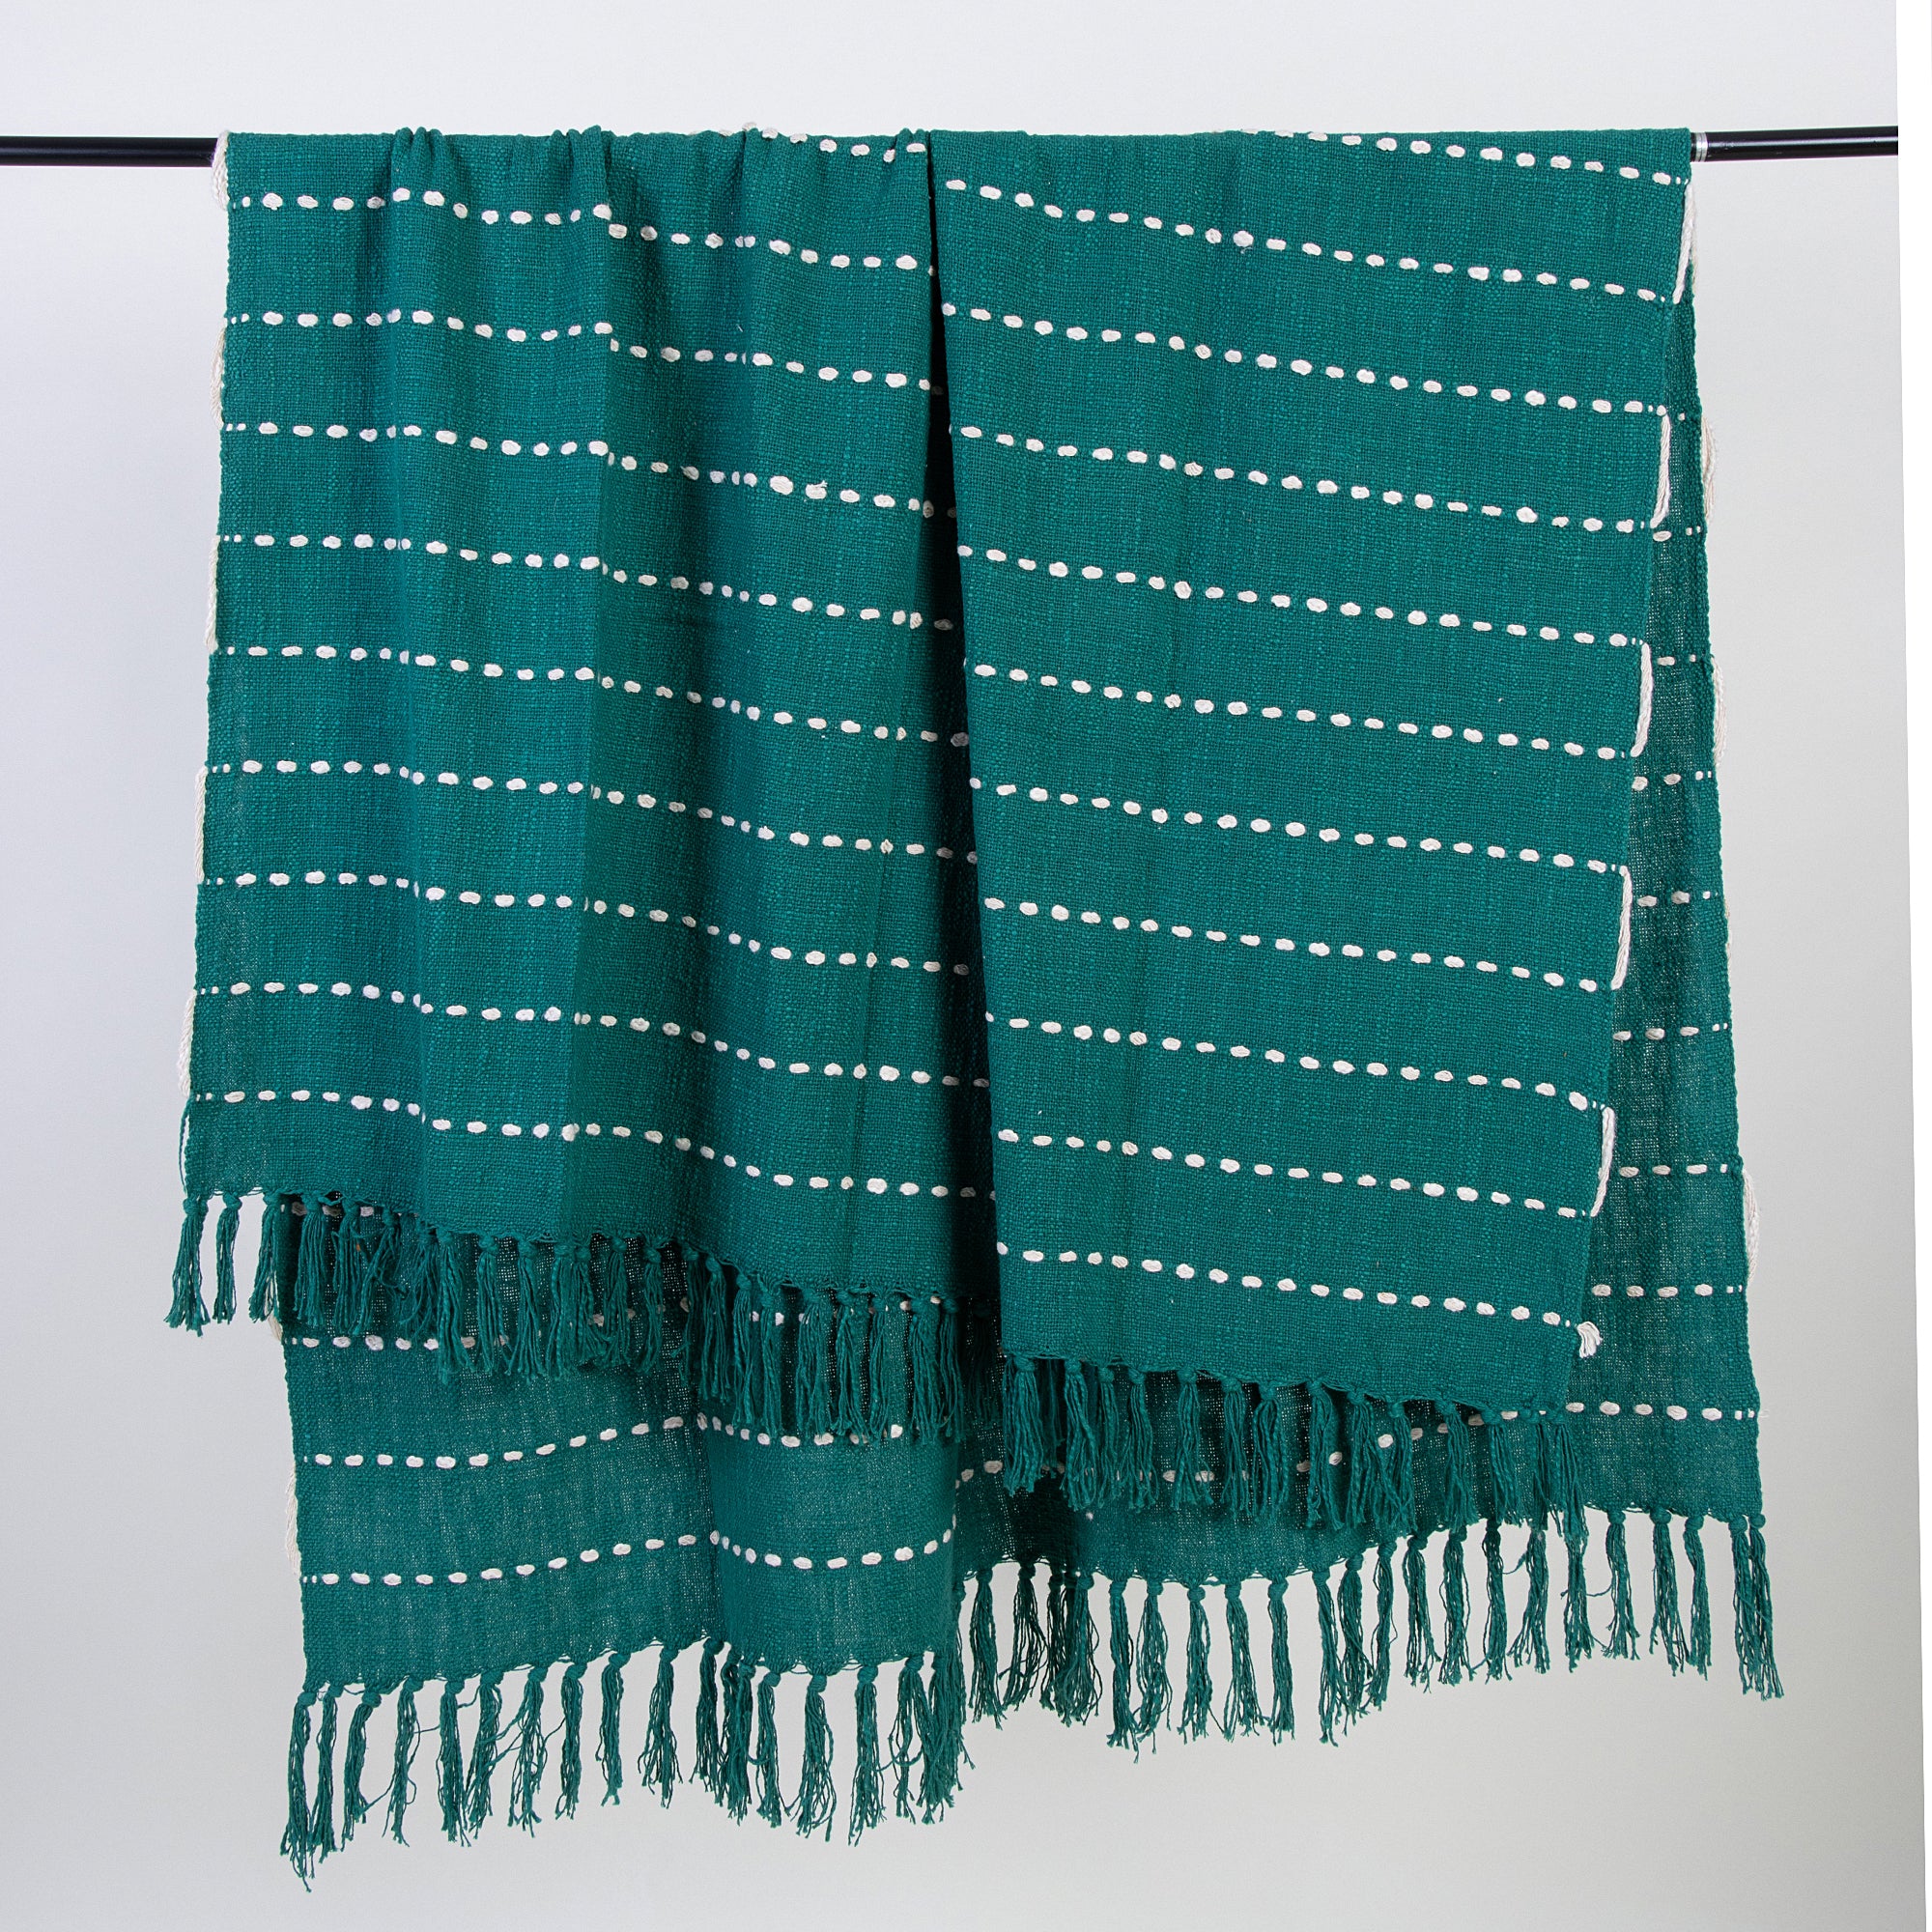 Throw Blanket Green Solid Cotton Home Decorative